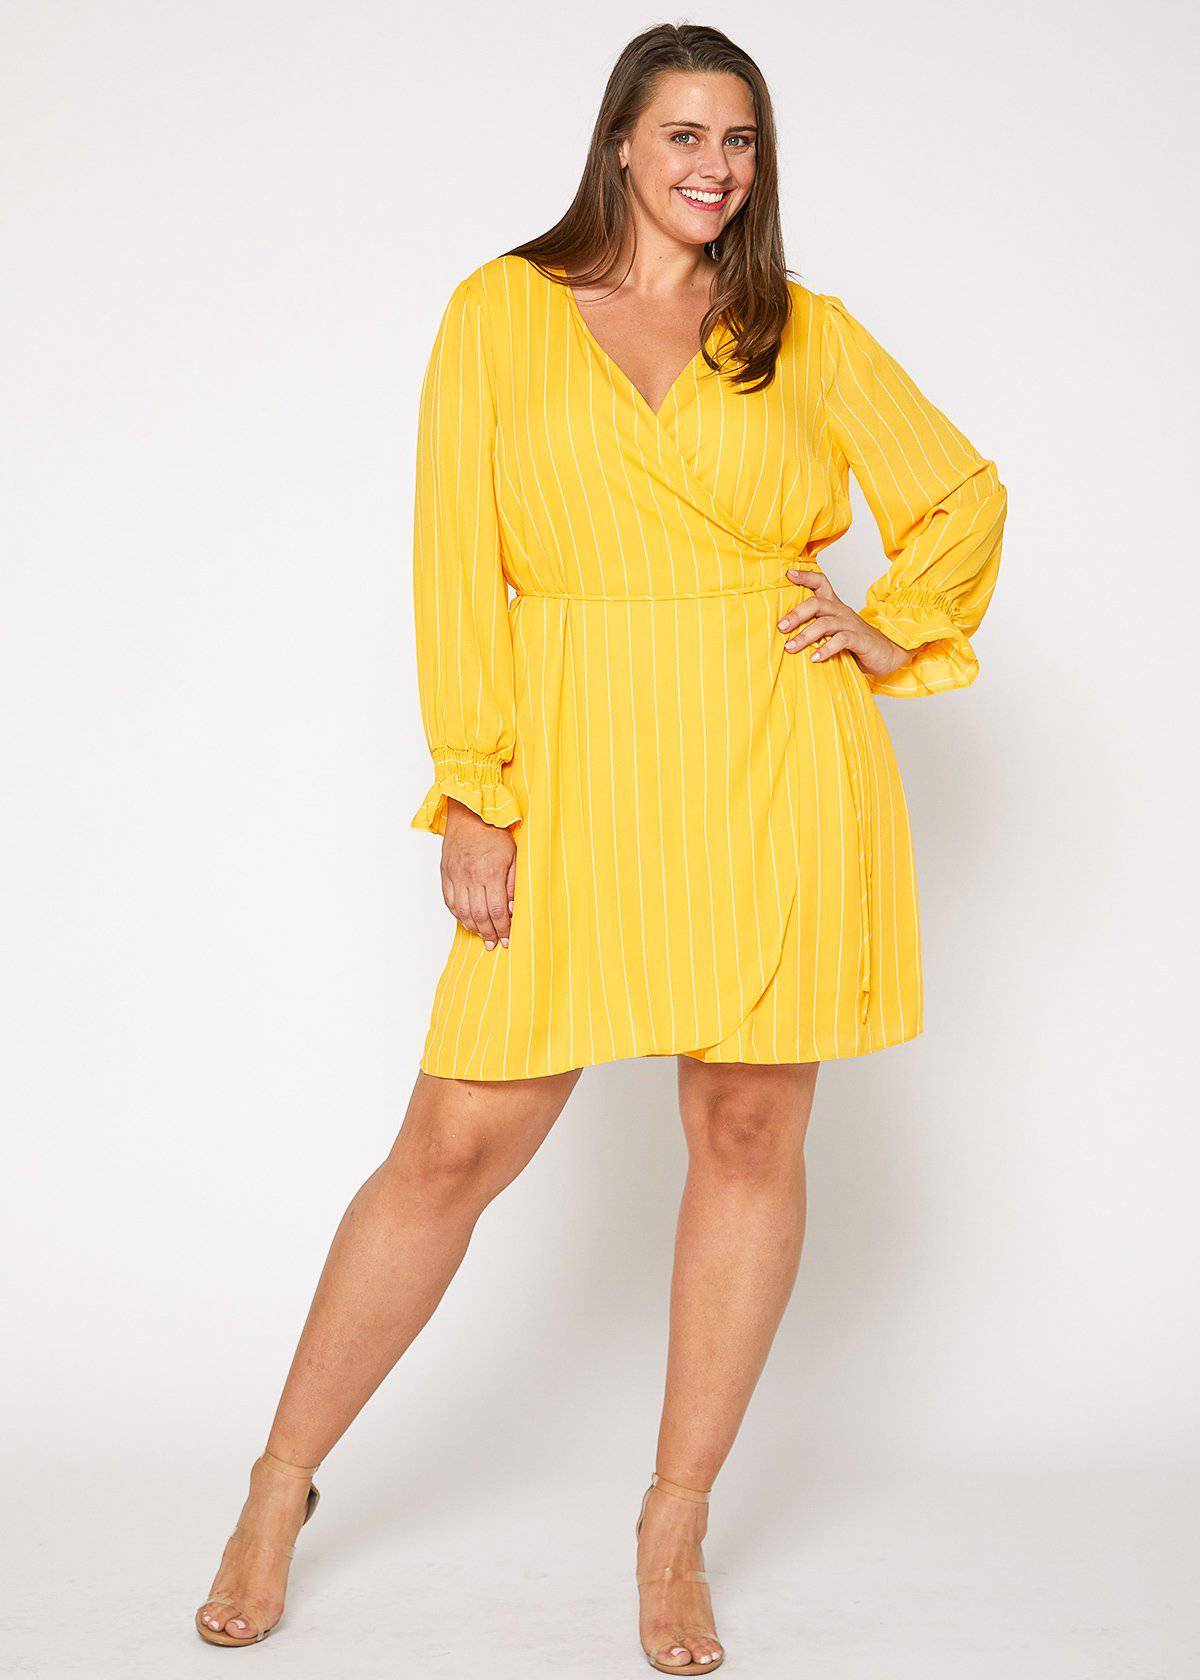 Plus Size Smocked Bell Sleeve Wrap Dress in Yellow by Shop at Konus